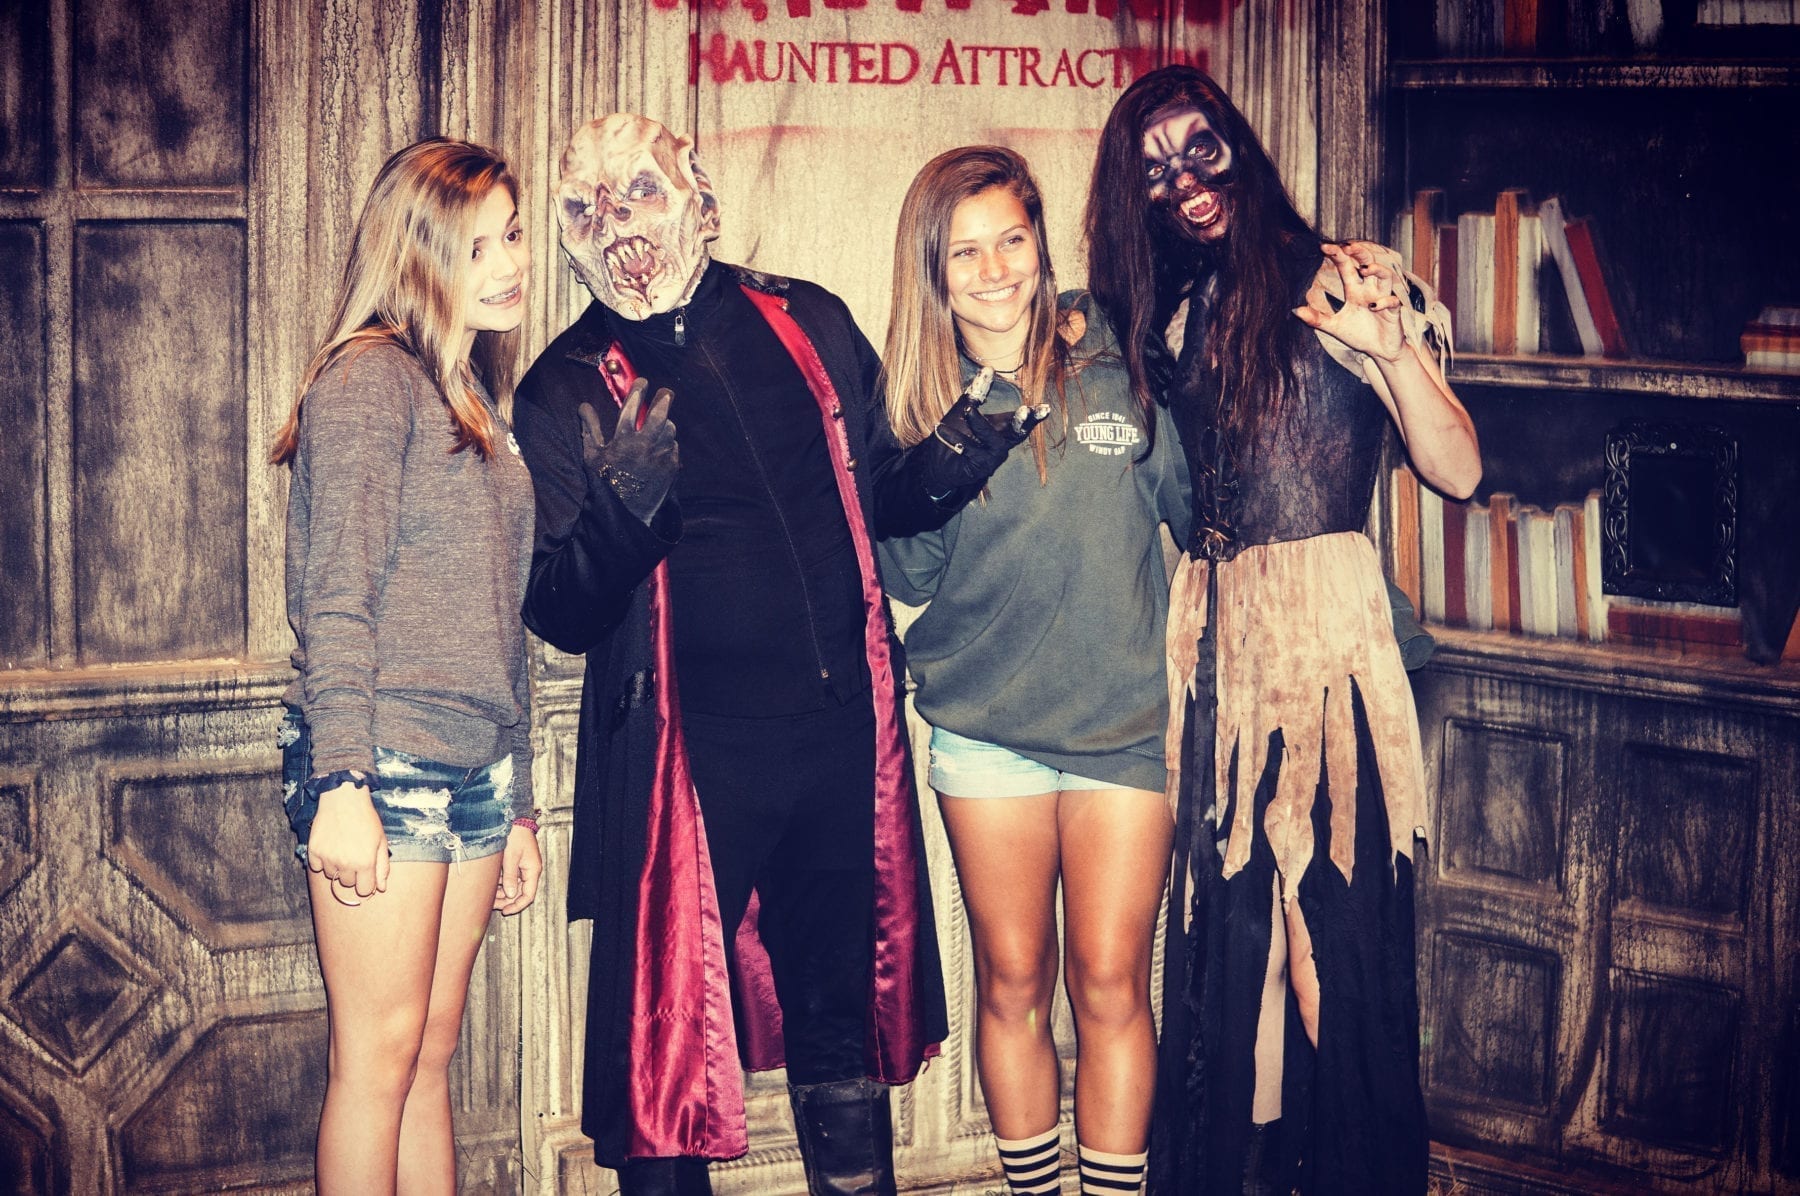 MADWORLD Haunted Attraction (@madworld_haunted_attraction) • Instagram  photos and videos